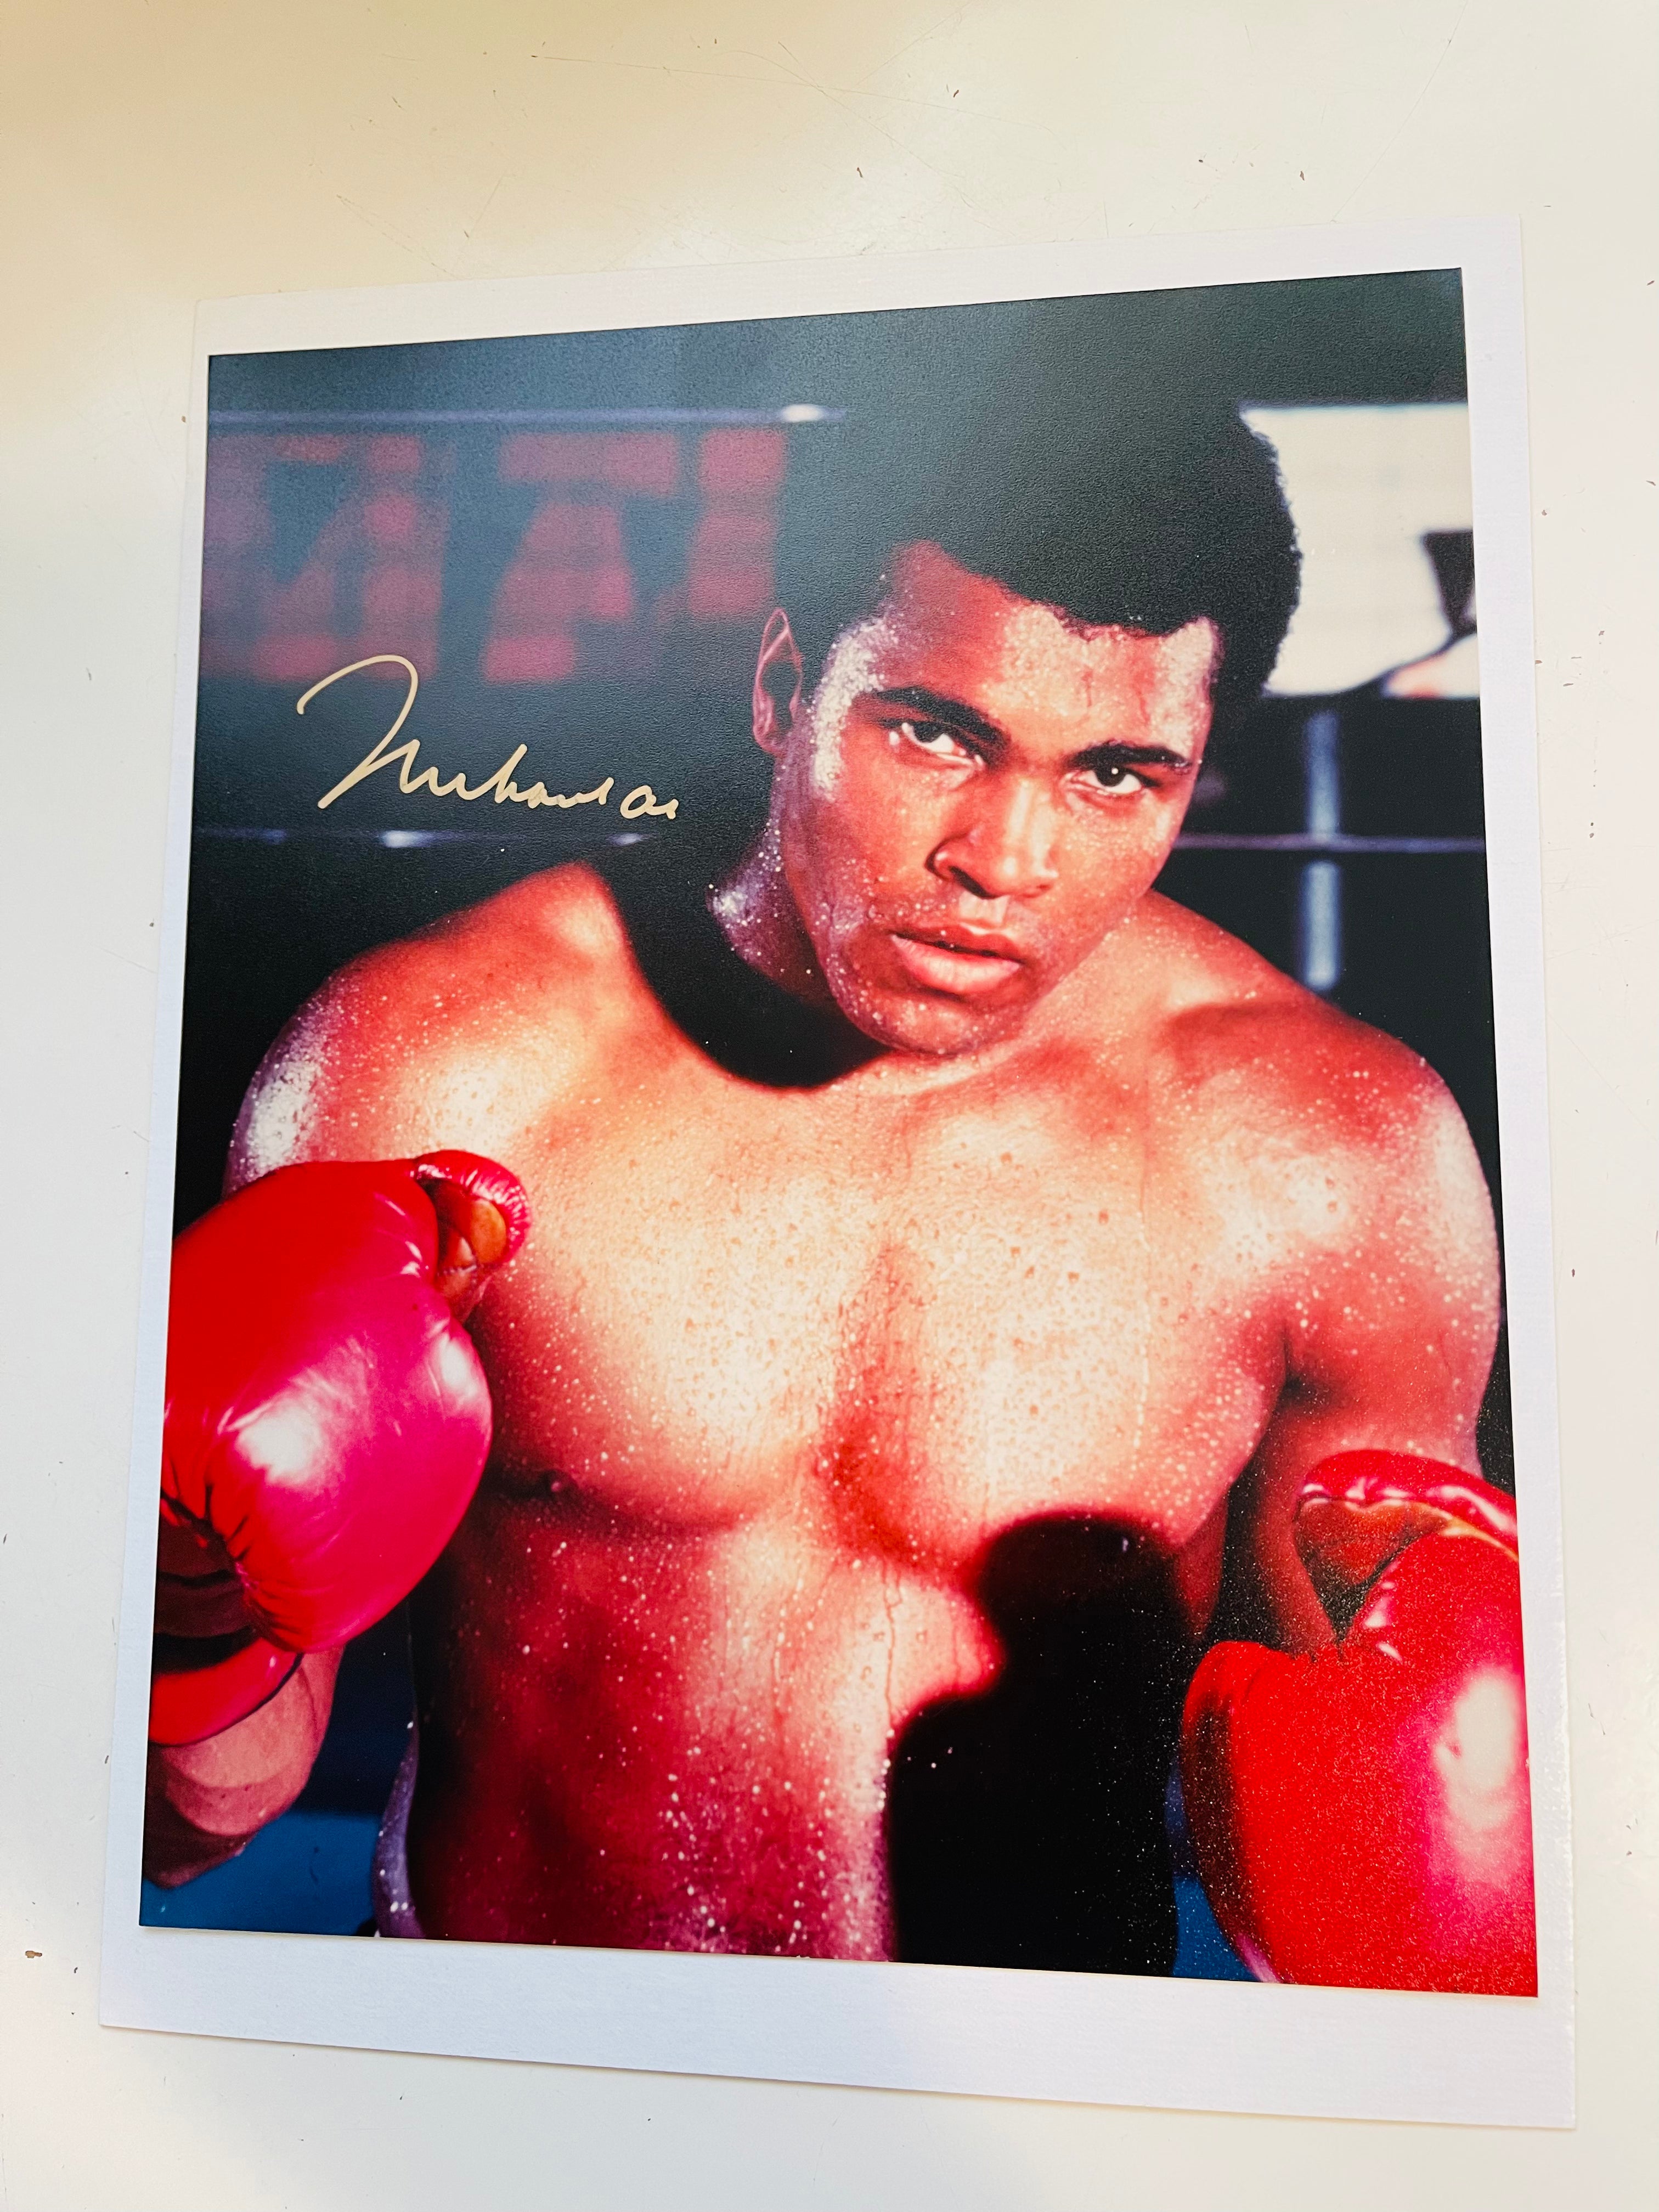 Muhammad Ali rare signed in person 8x10 autograph by this legend. Sold with COA